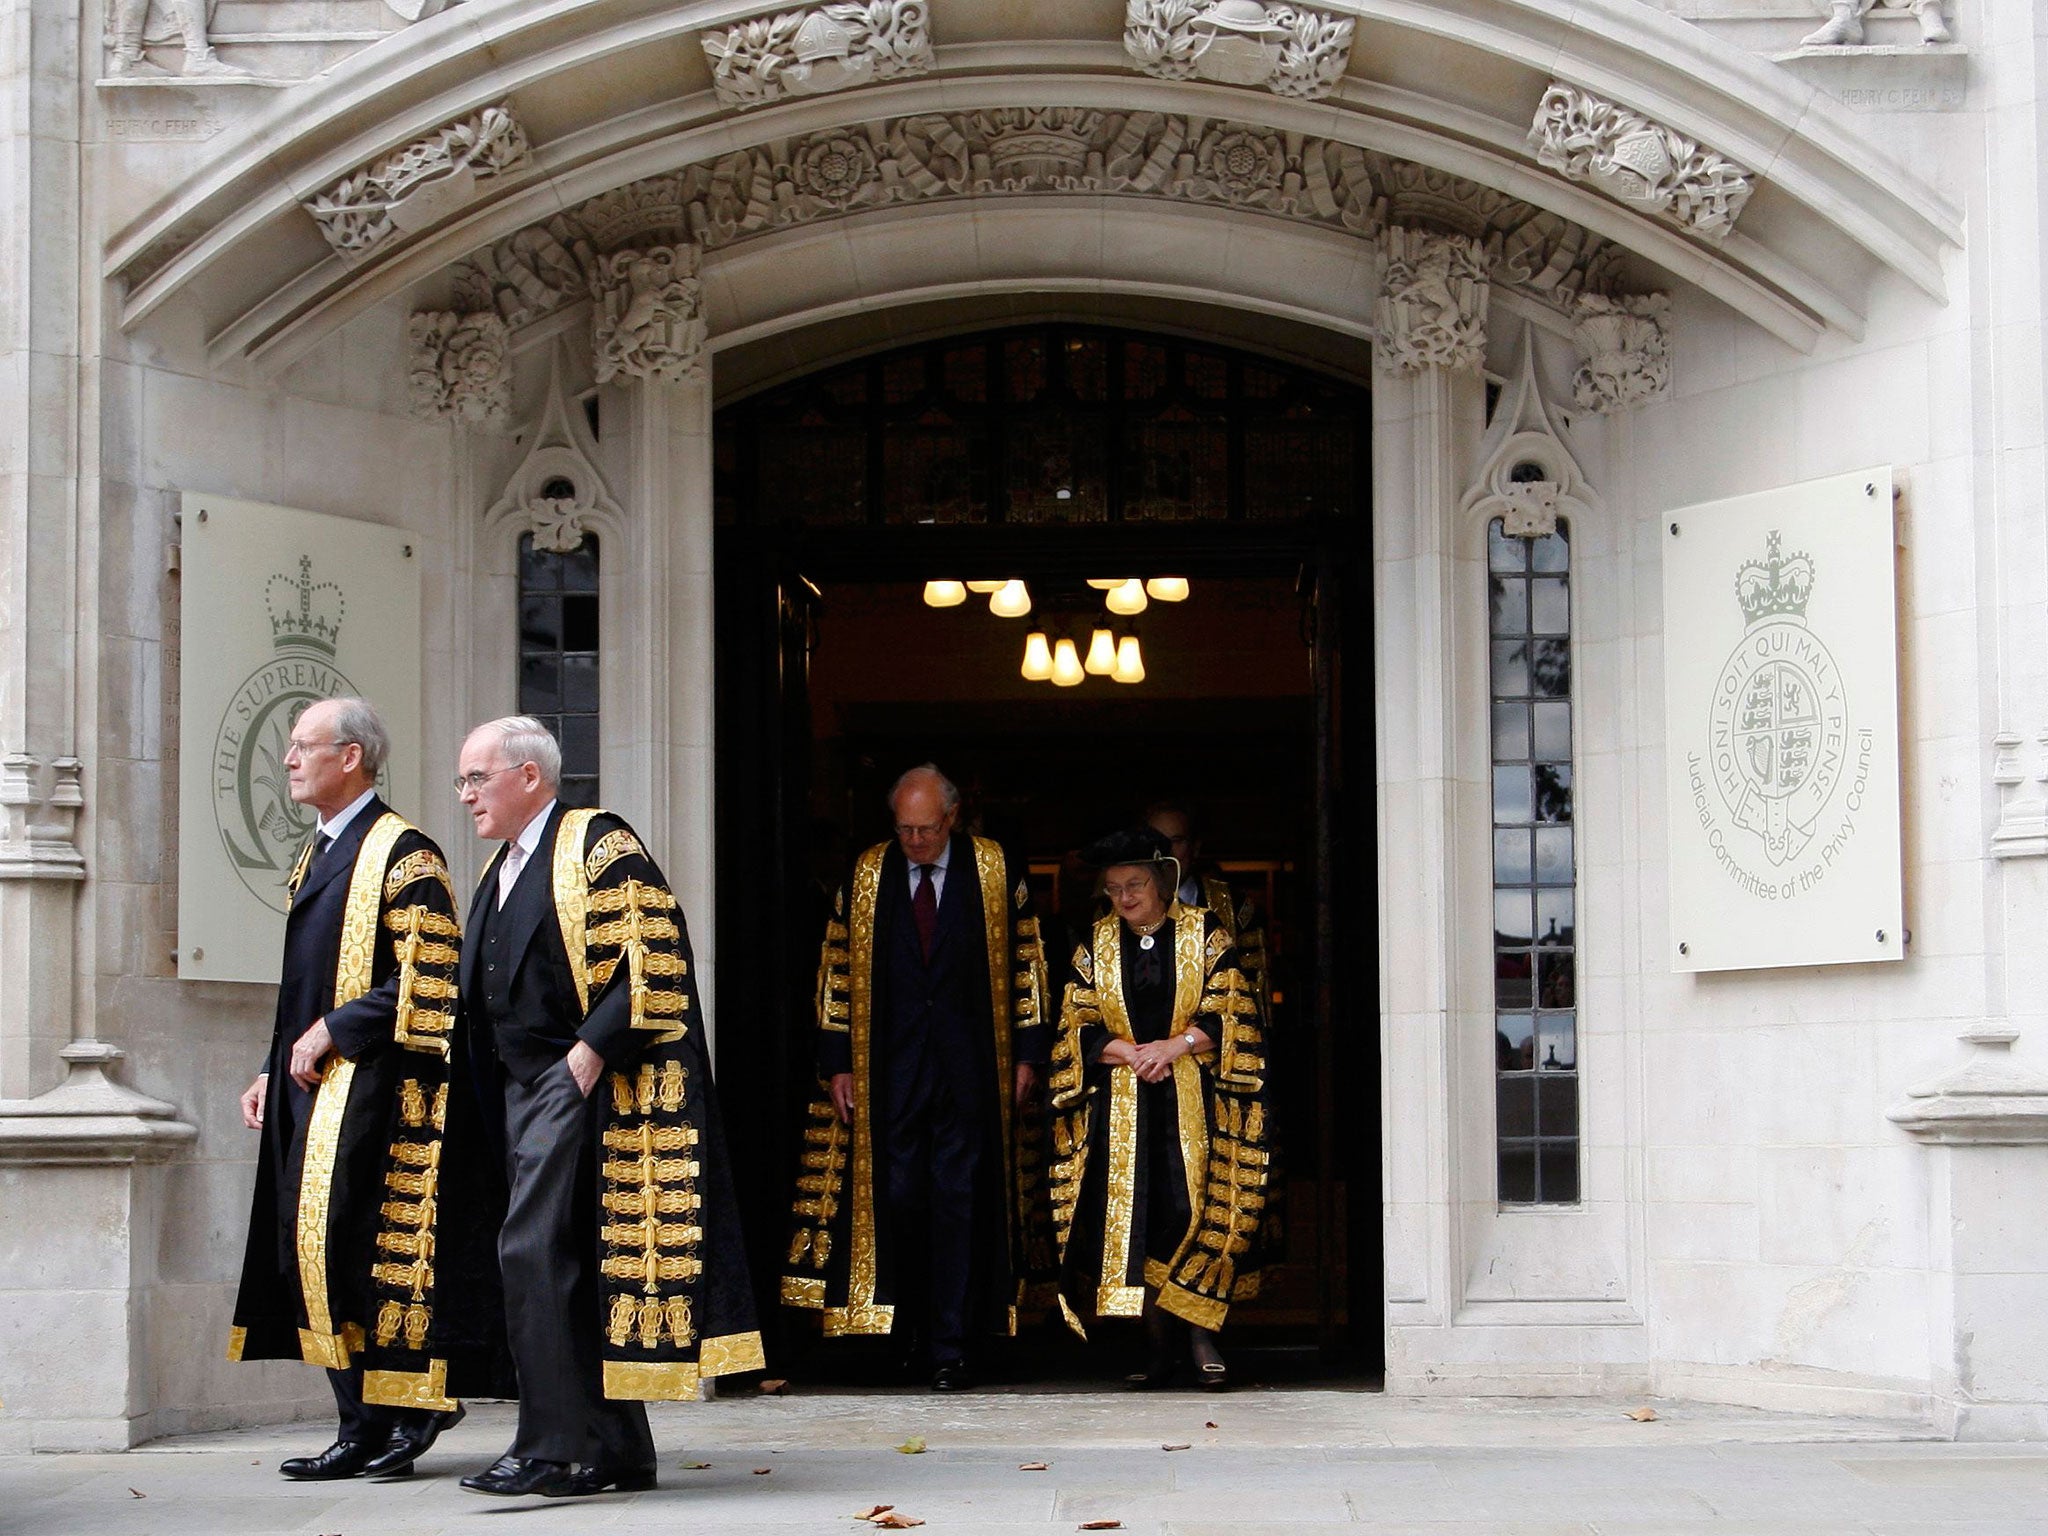 Justices of the Supreme Court leave the Supreme Court of the United Kingdom in Parliament Square, London